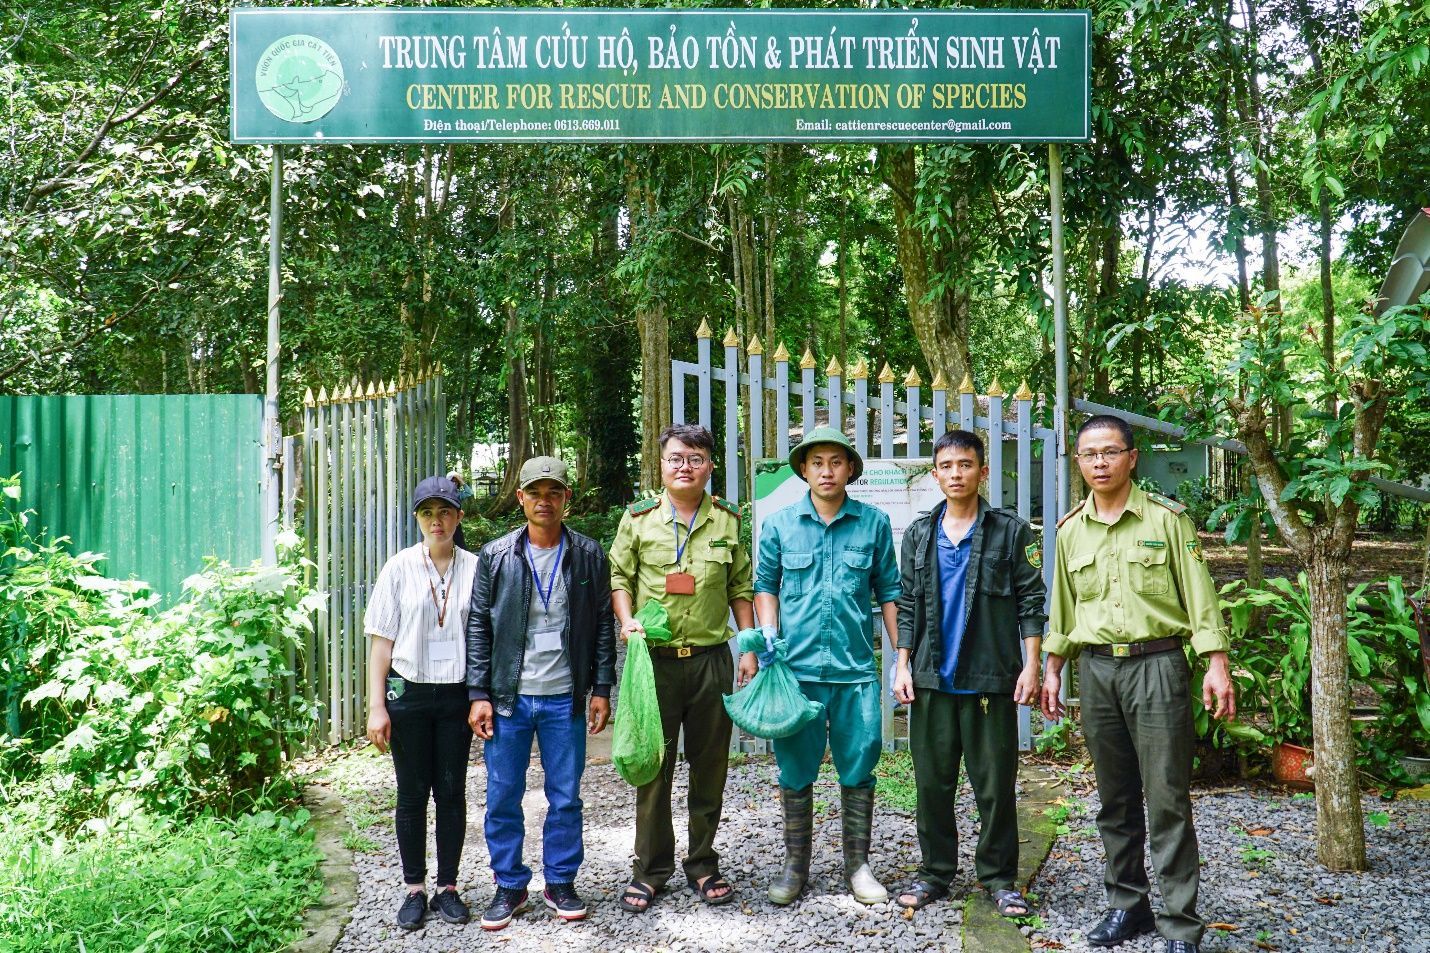 A group of people standing under a sign

Description automatically generated with medium confidence